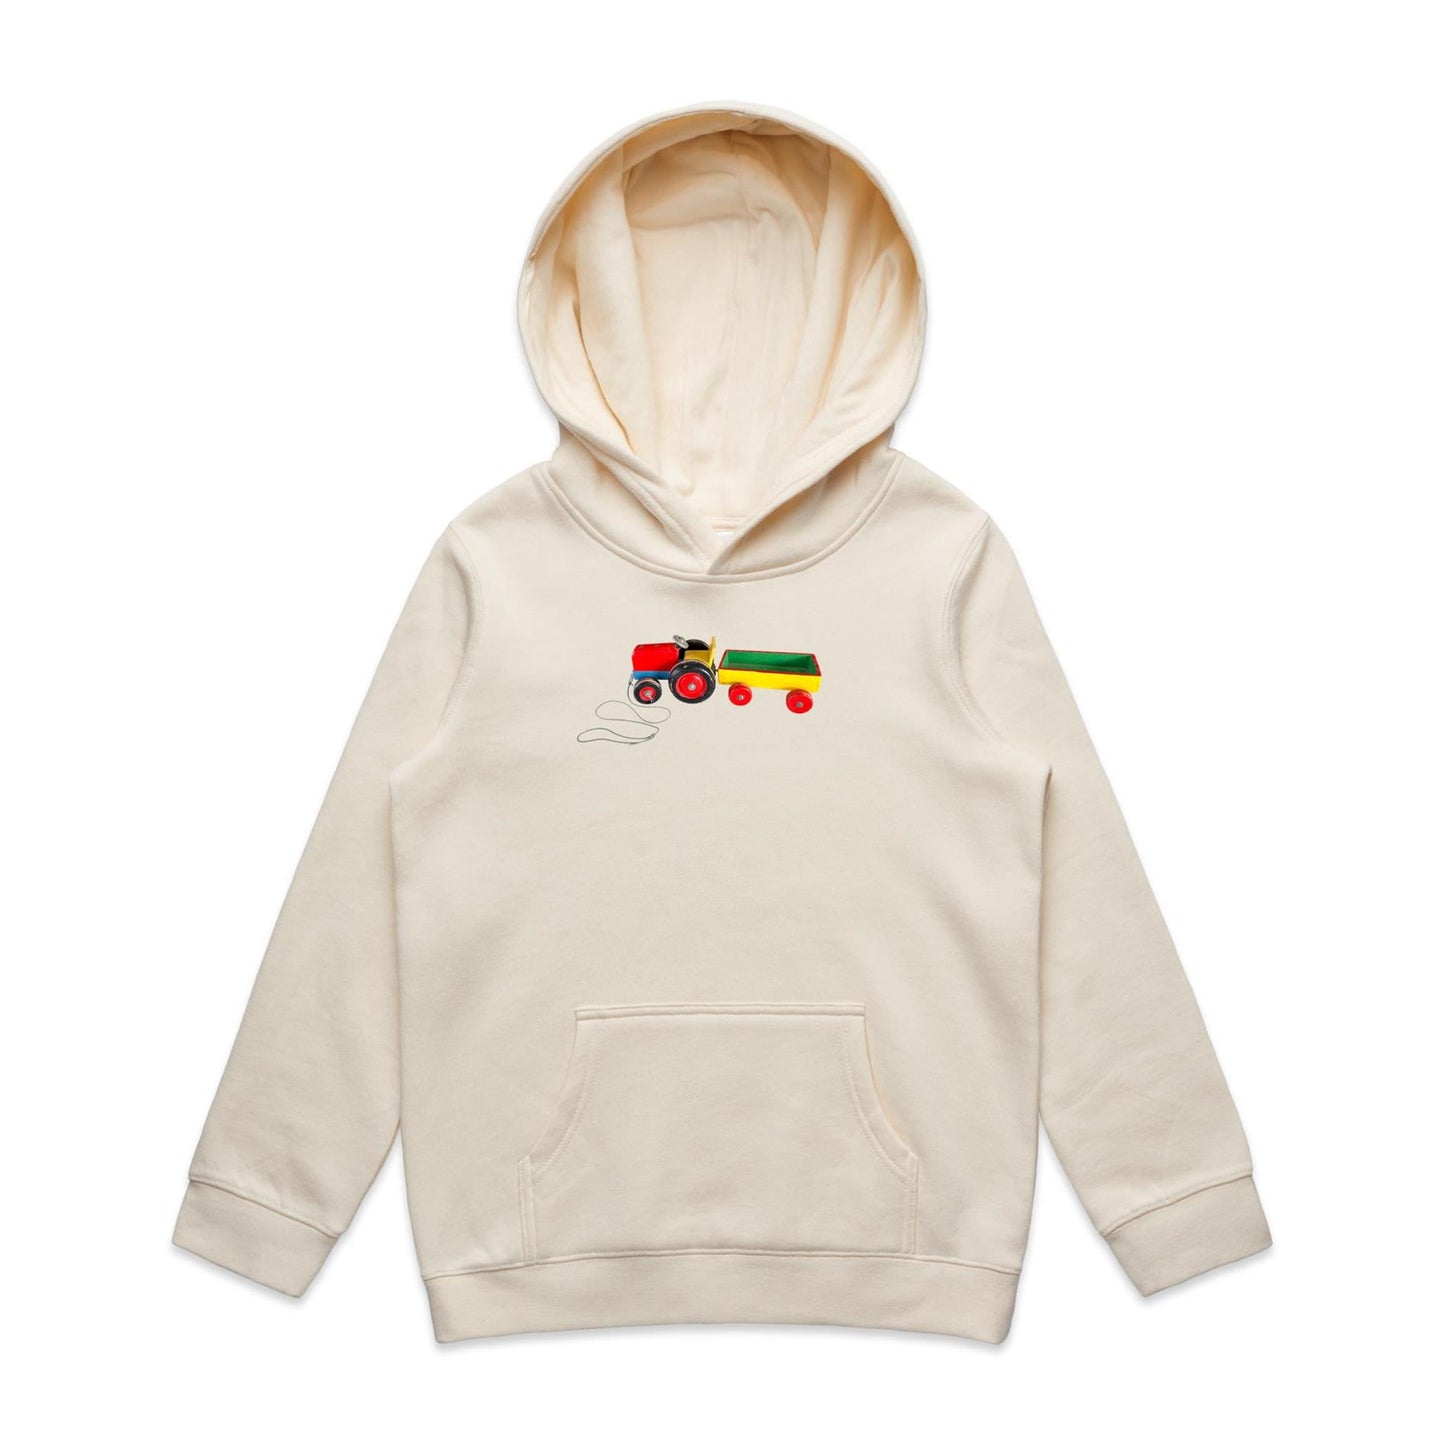 Toy Tractor Hoodies for Kids